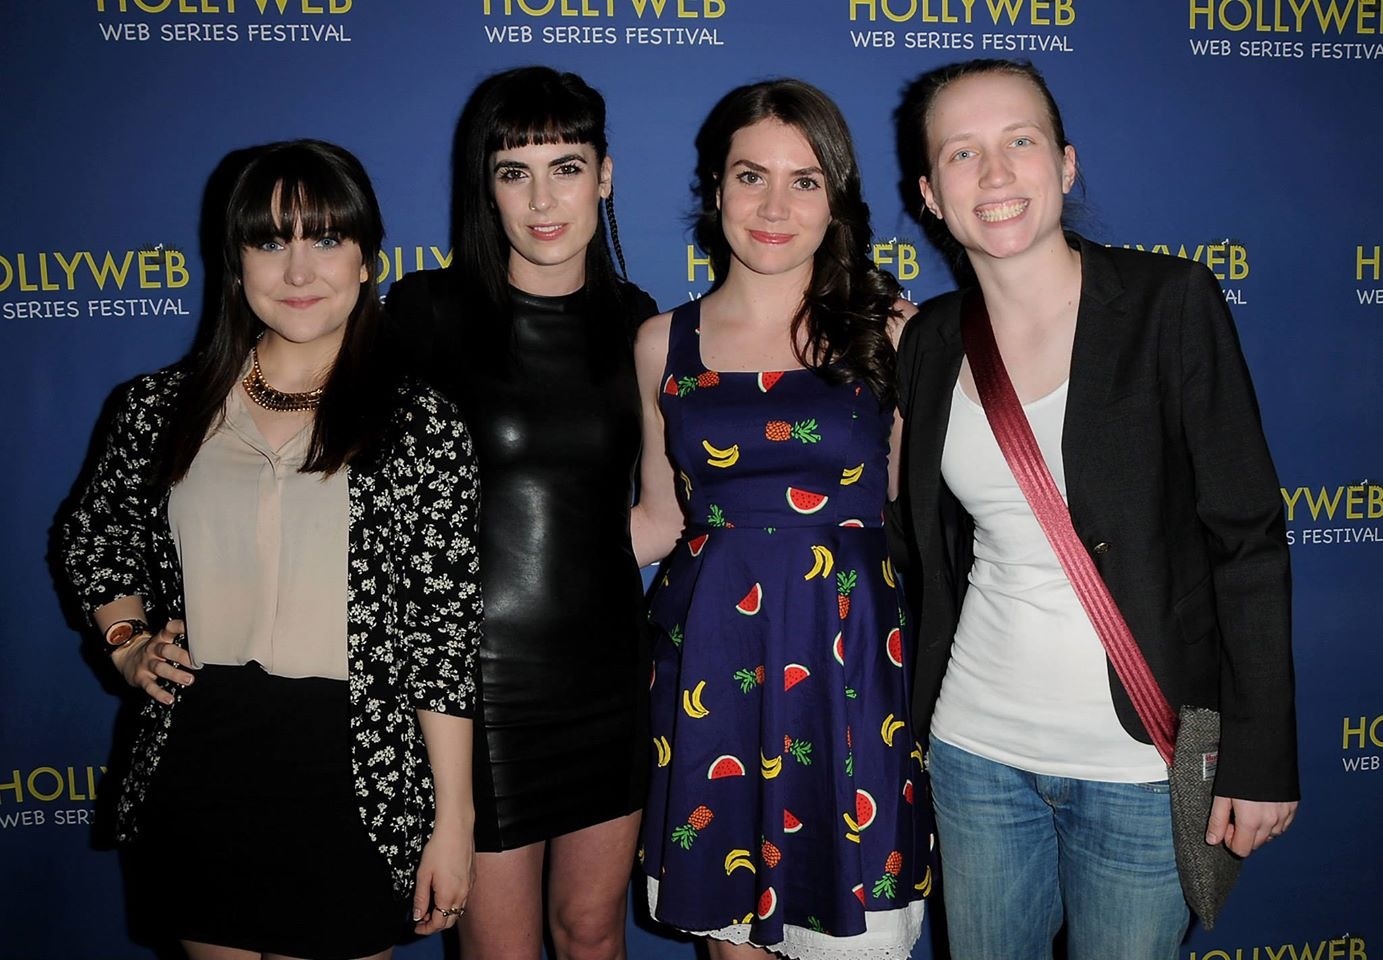 Laura Geluch, Christa Anderson, Chelsea Moore and Justine Stevens at the Hollyweb Fest Gala